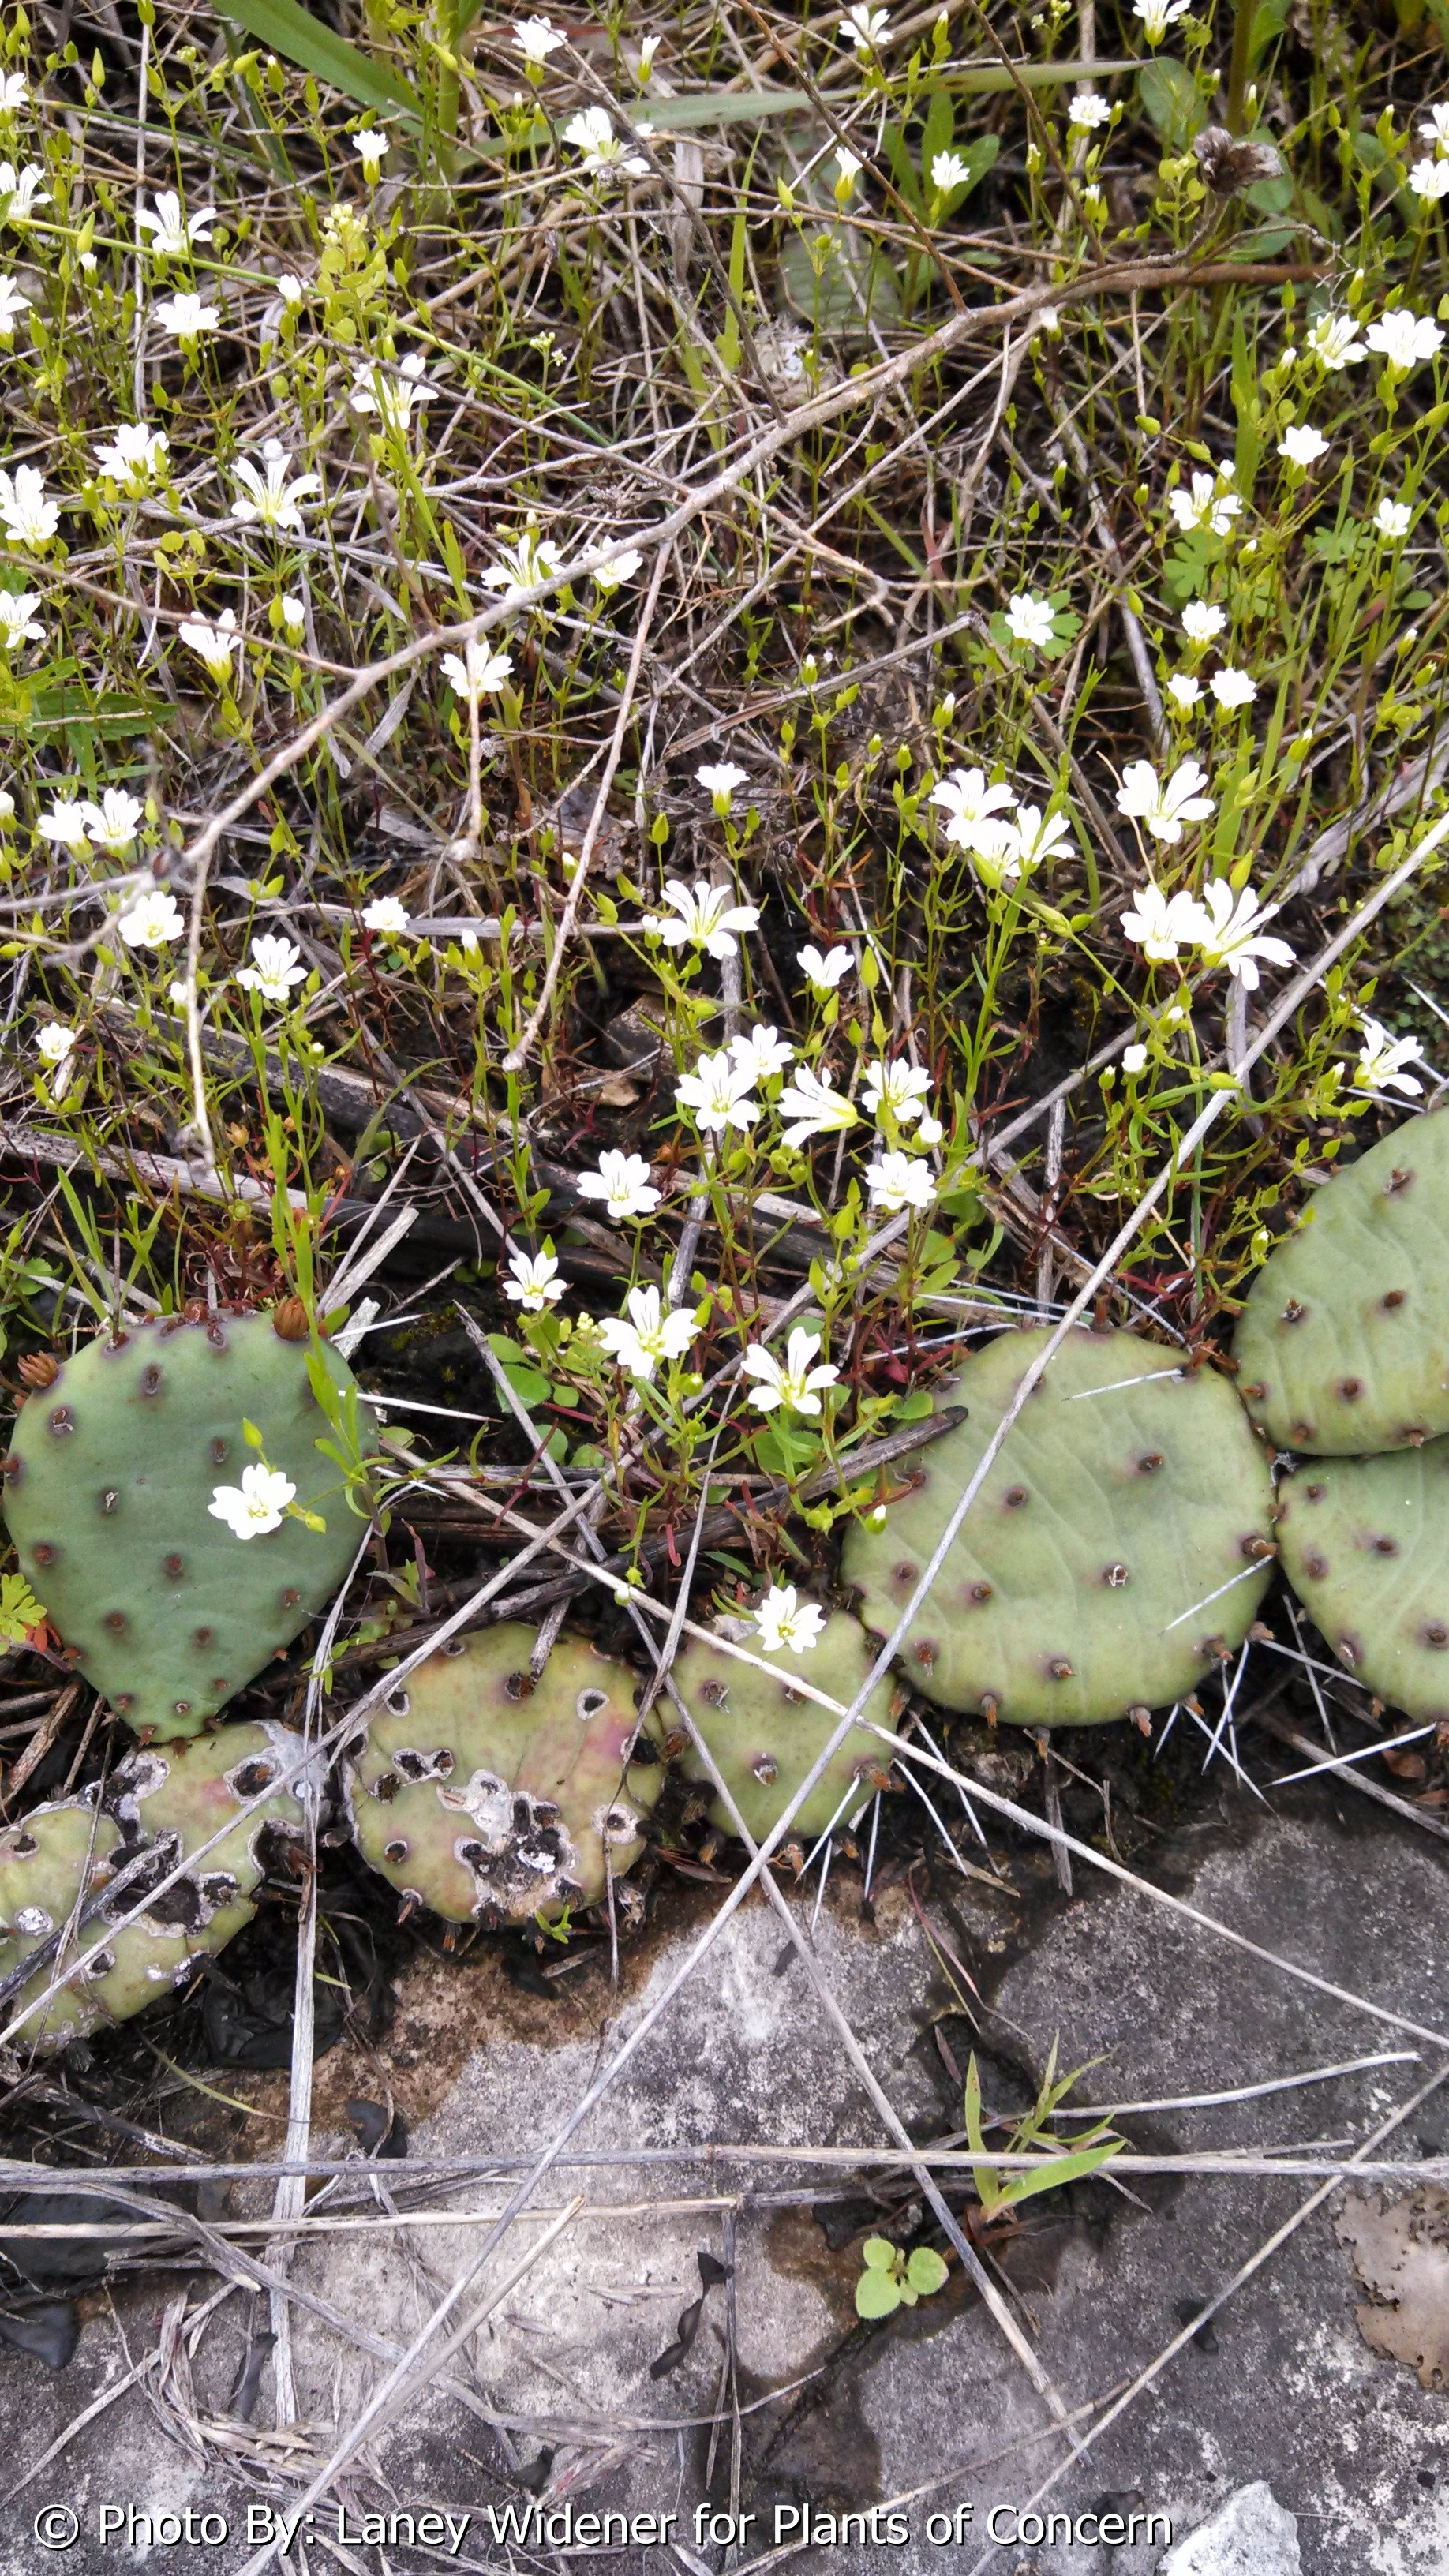 Photo of Slender Sandwort and Prickly Pear growing next to exposed dolostone